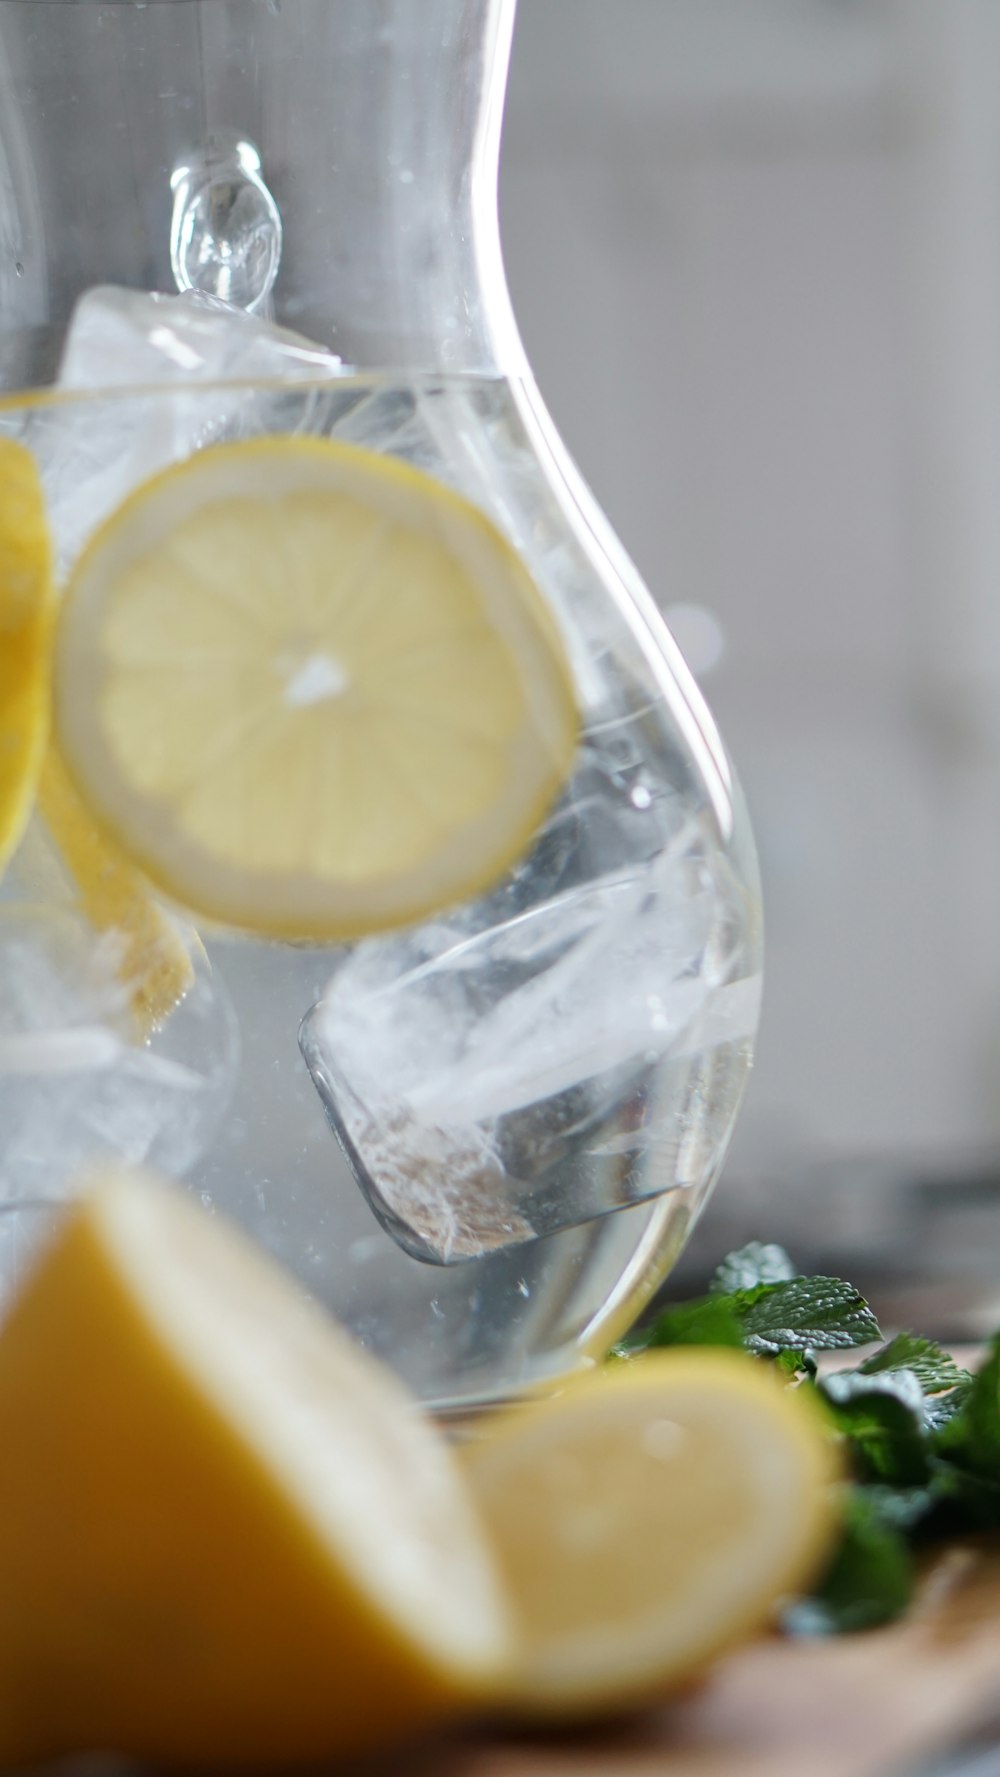 sliced lemon inside pitcher with ice cubes